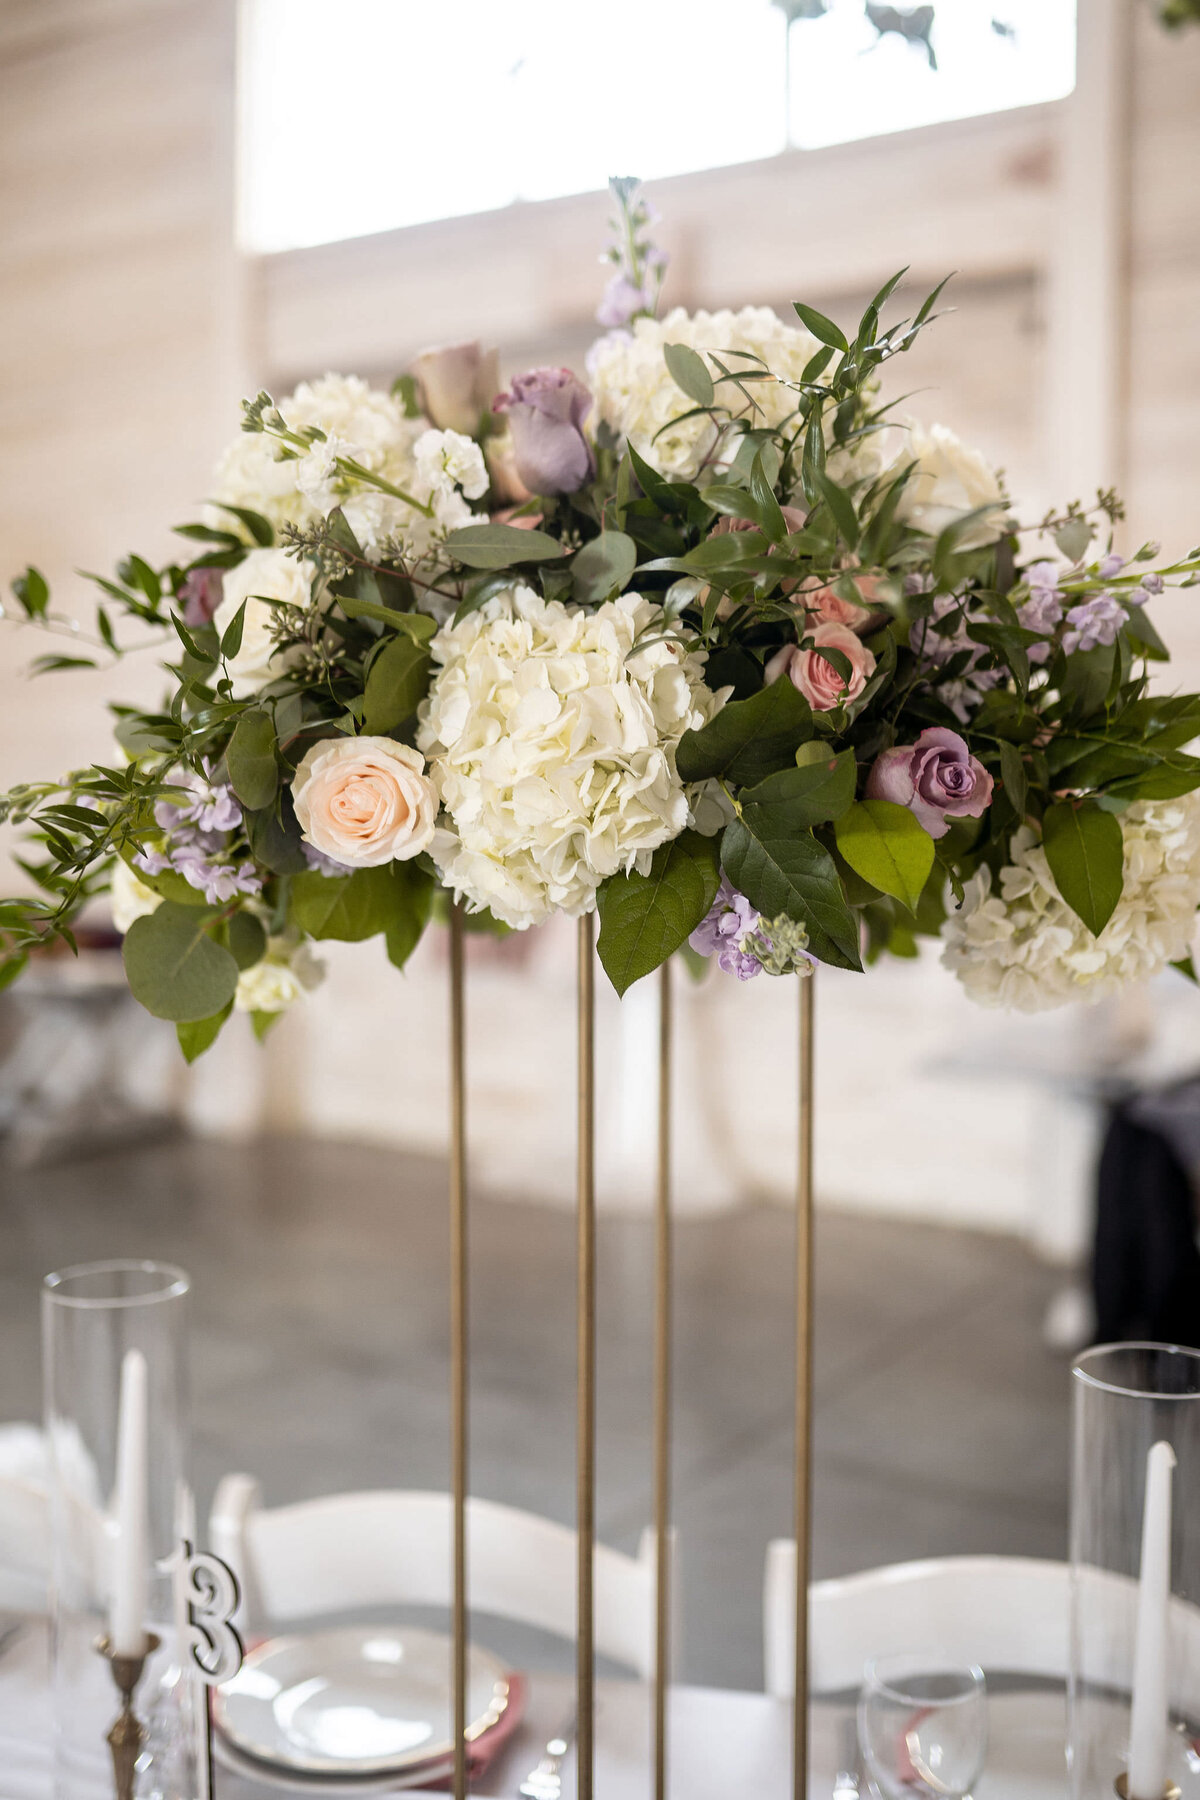 Large gold stand wedding arrangement with white, pink, lavender, and green flowers